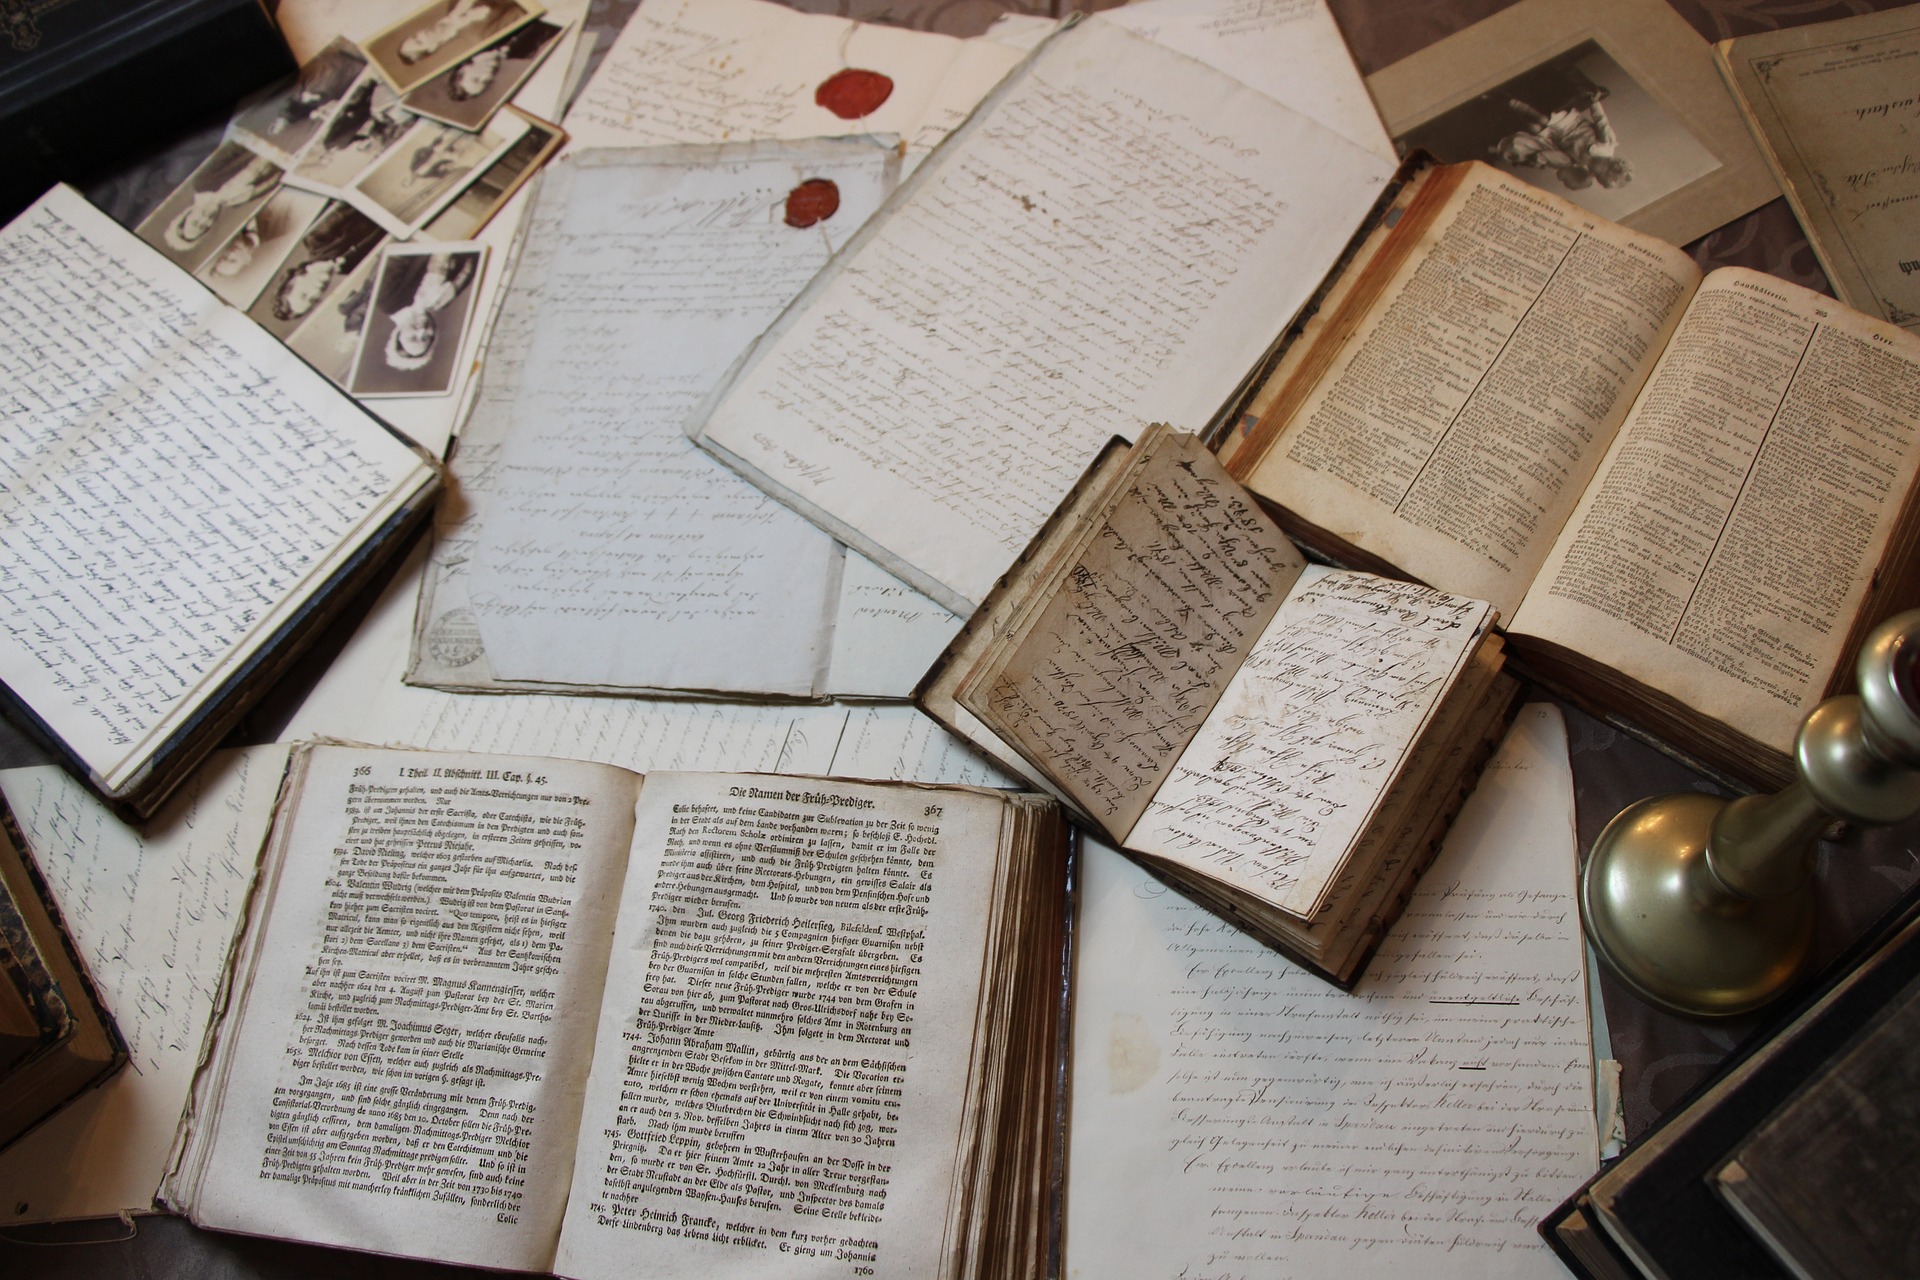 Many old books, photos, and documents